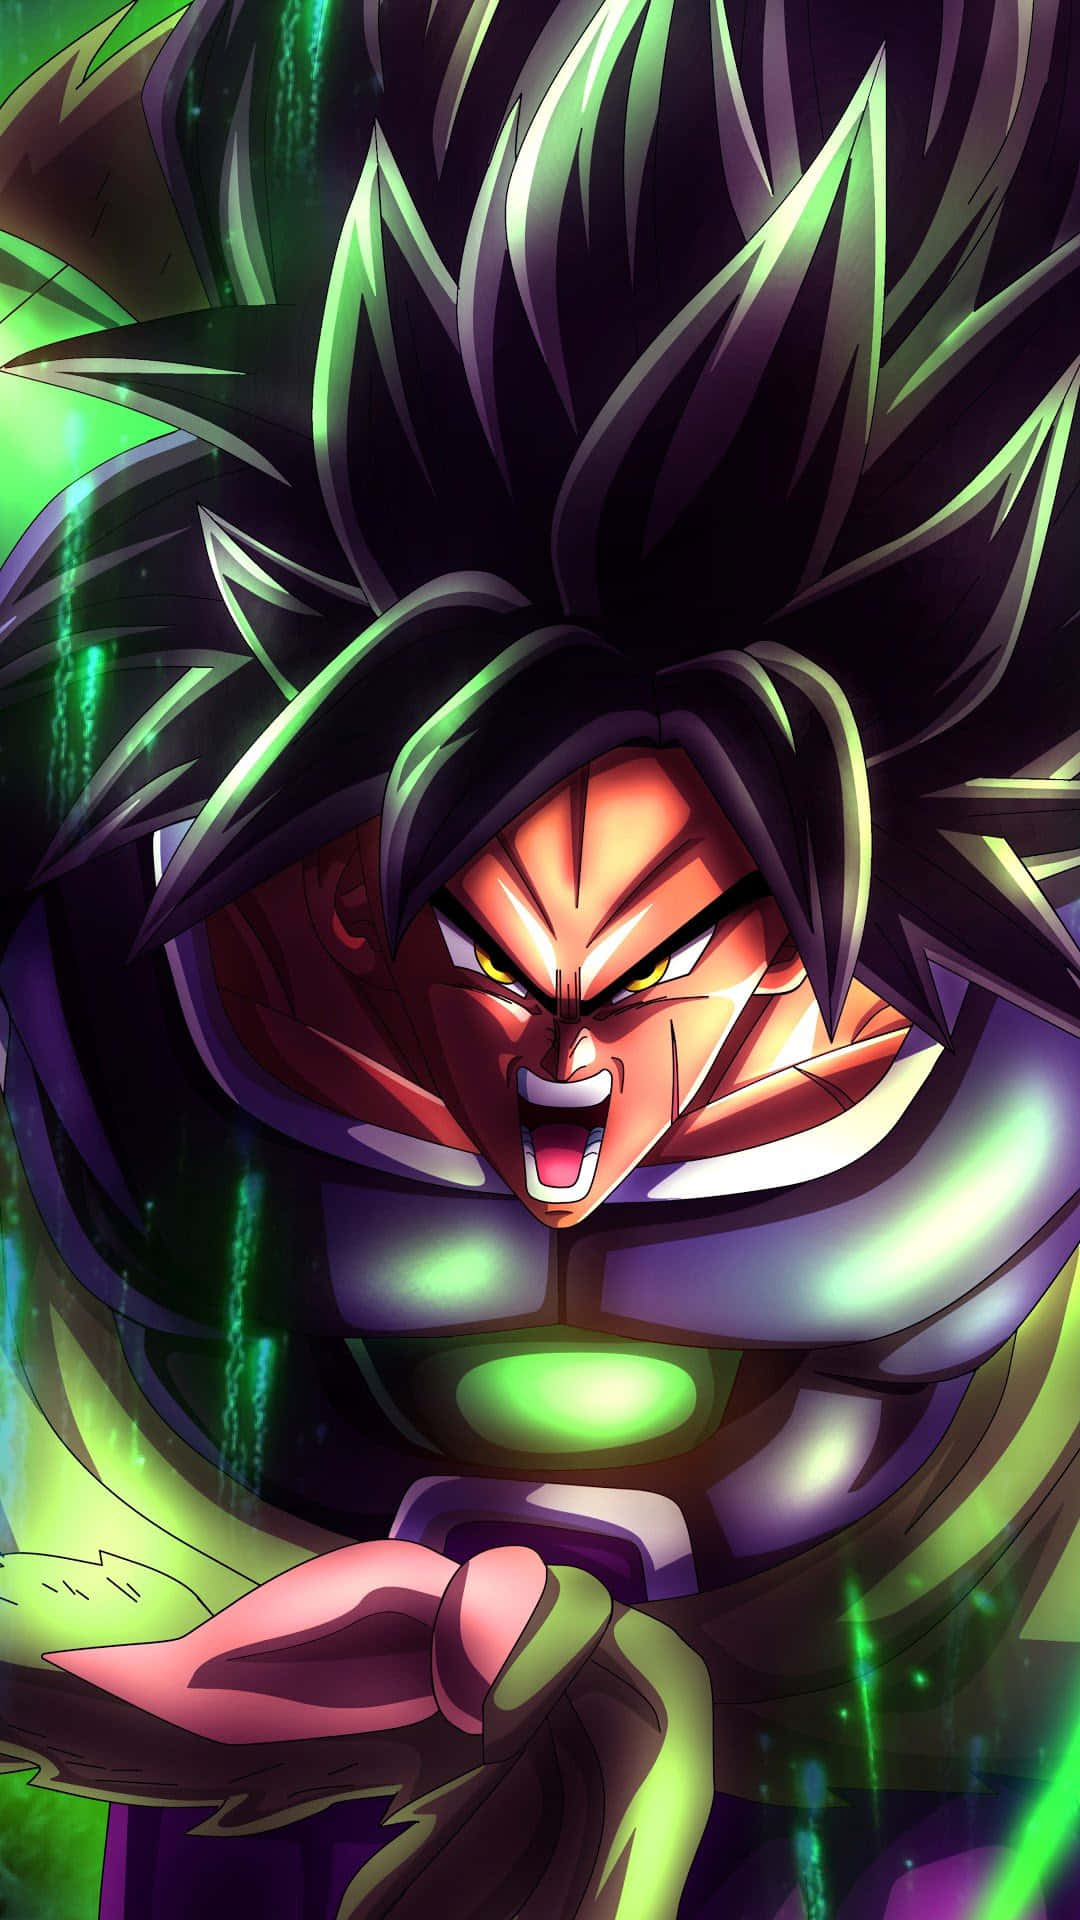 Dragon Ball Super: Broly - Plugged In